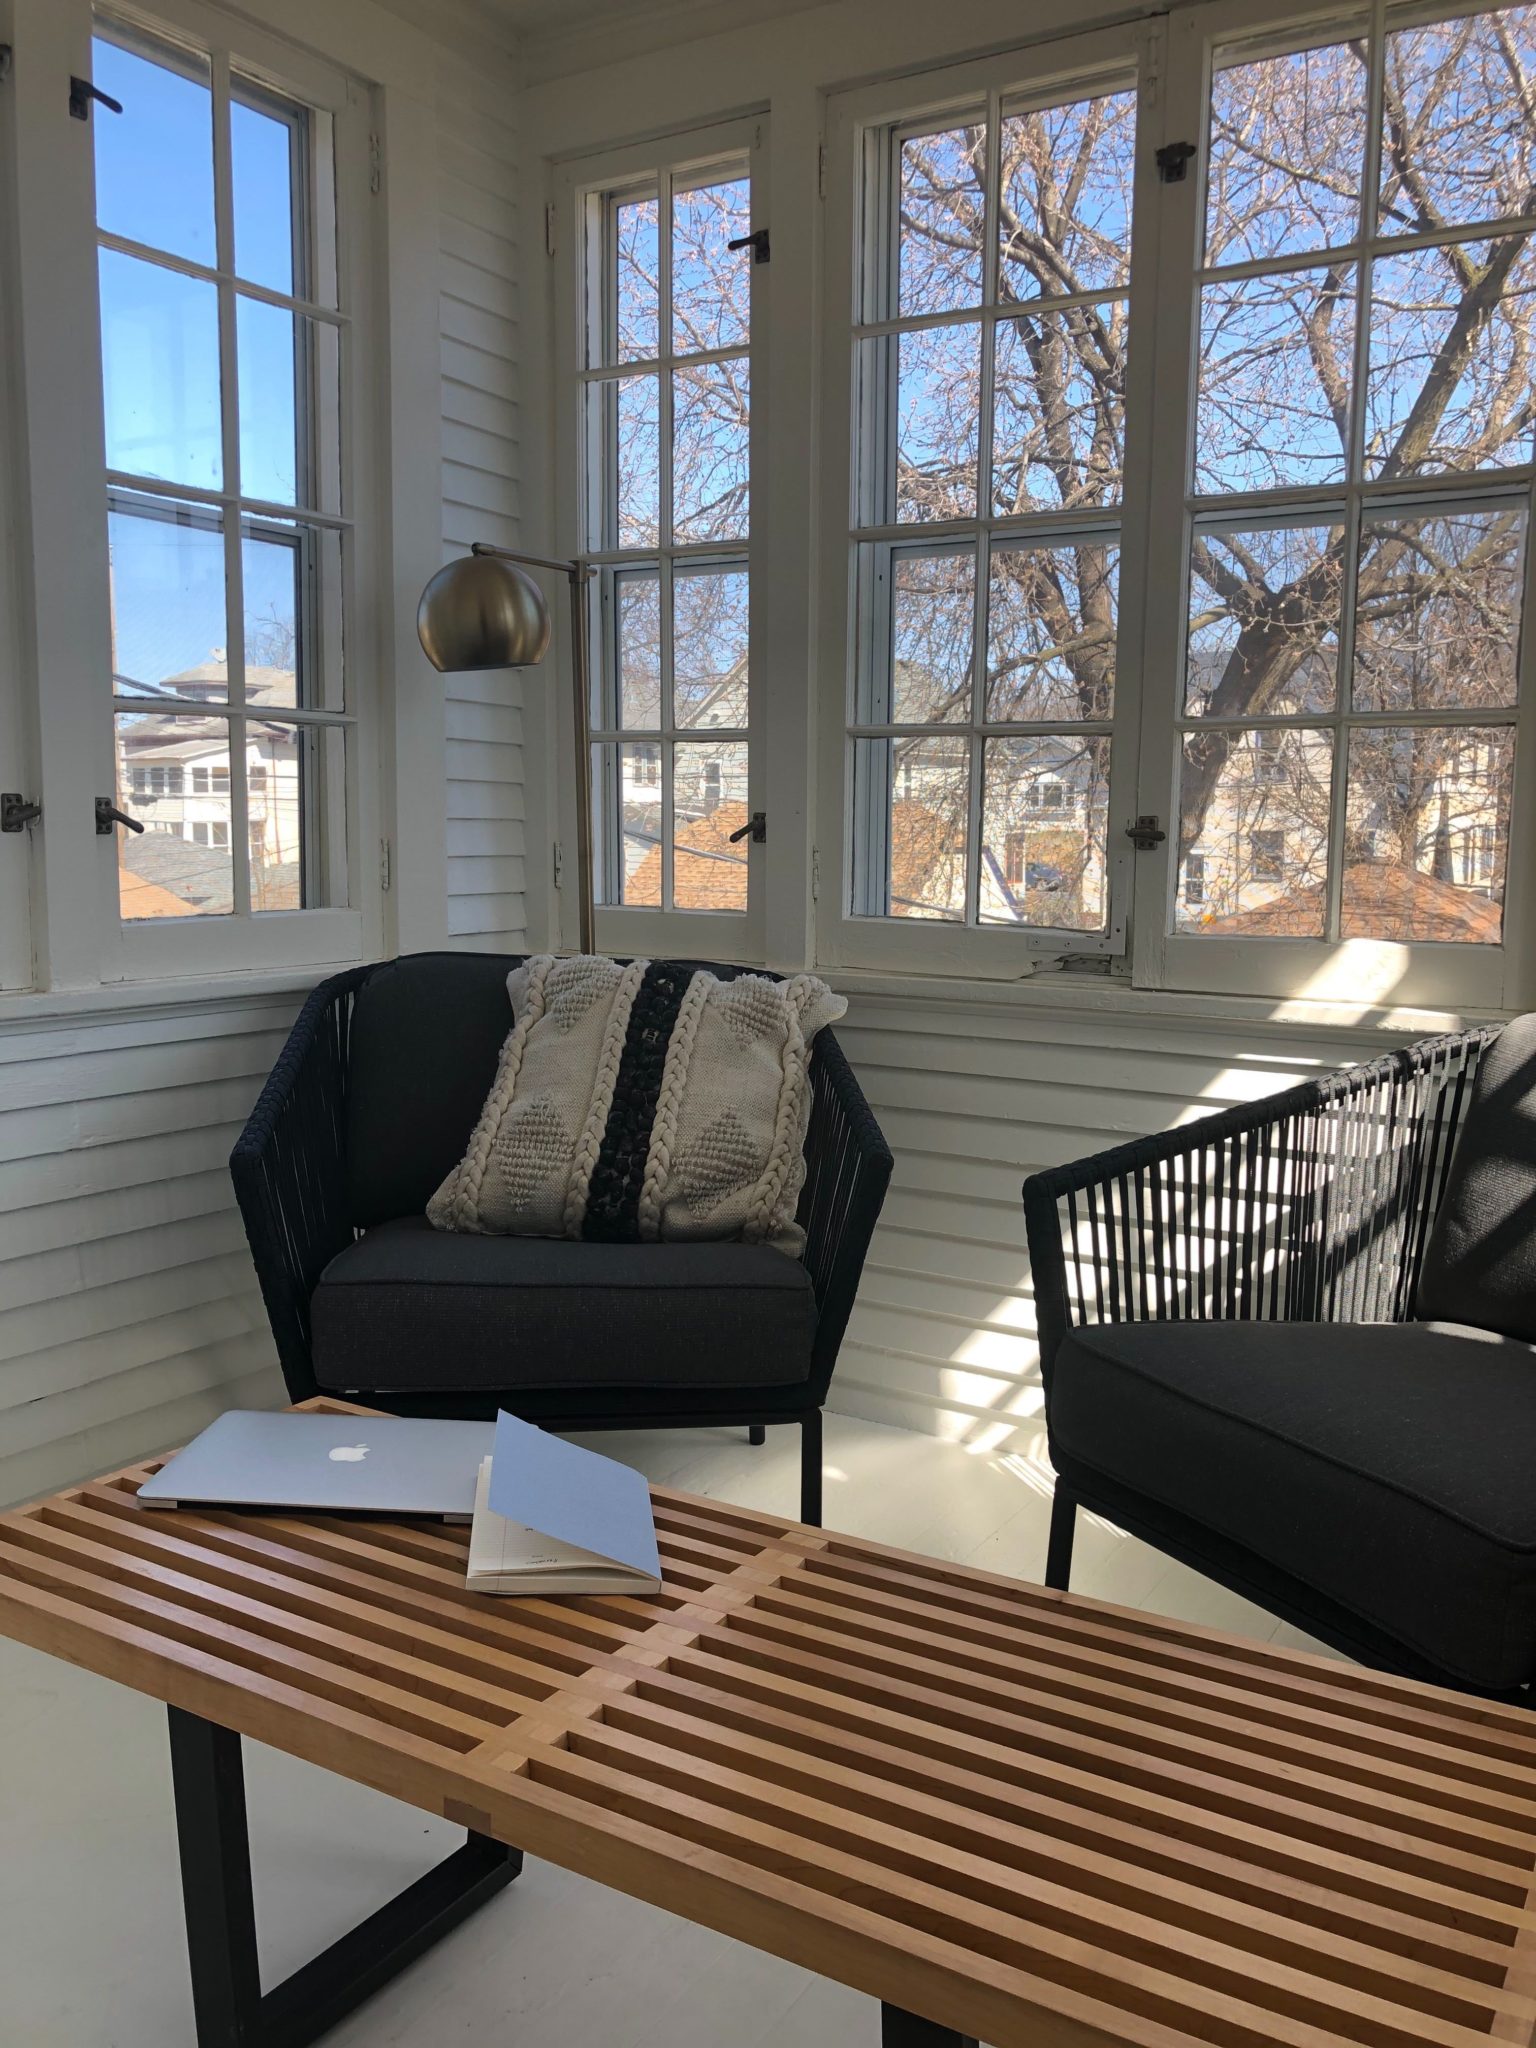 Work from Home Desk Porch